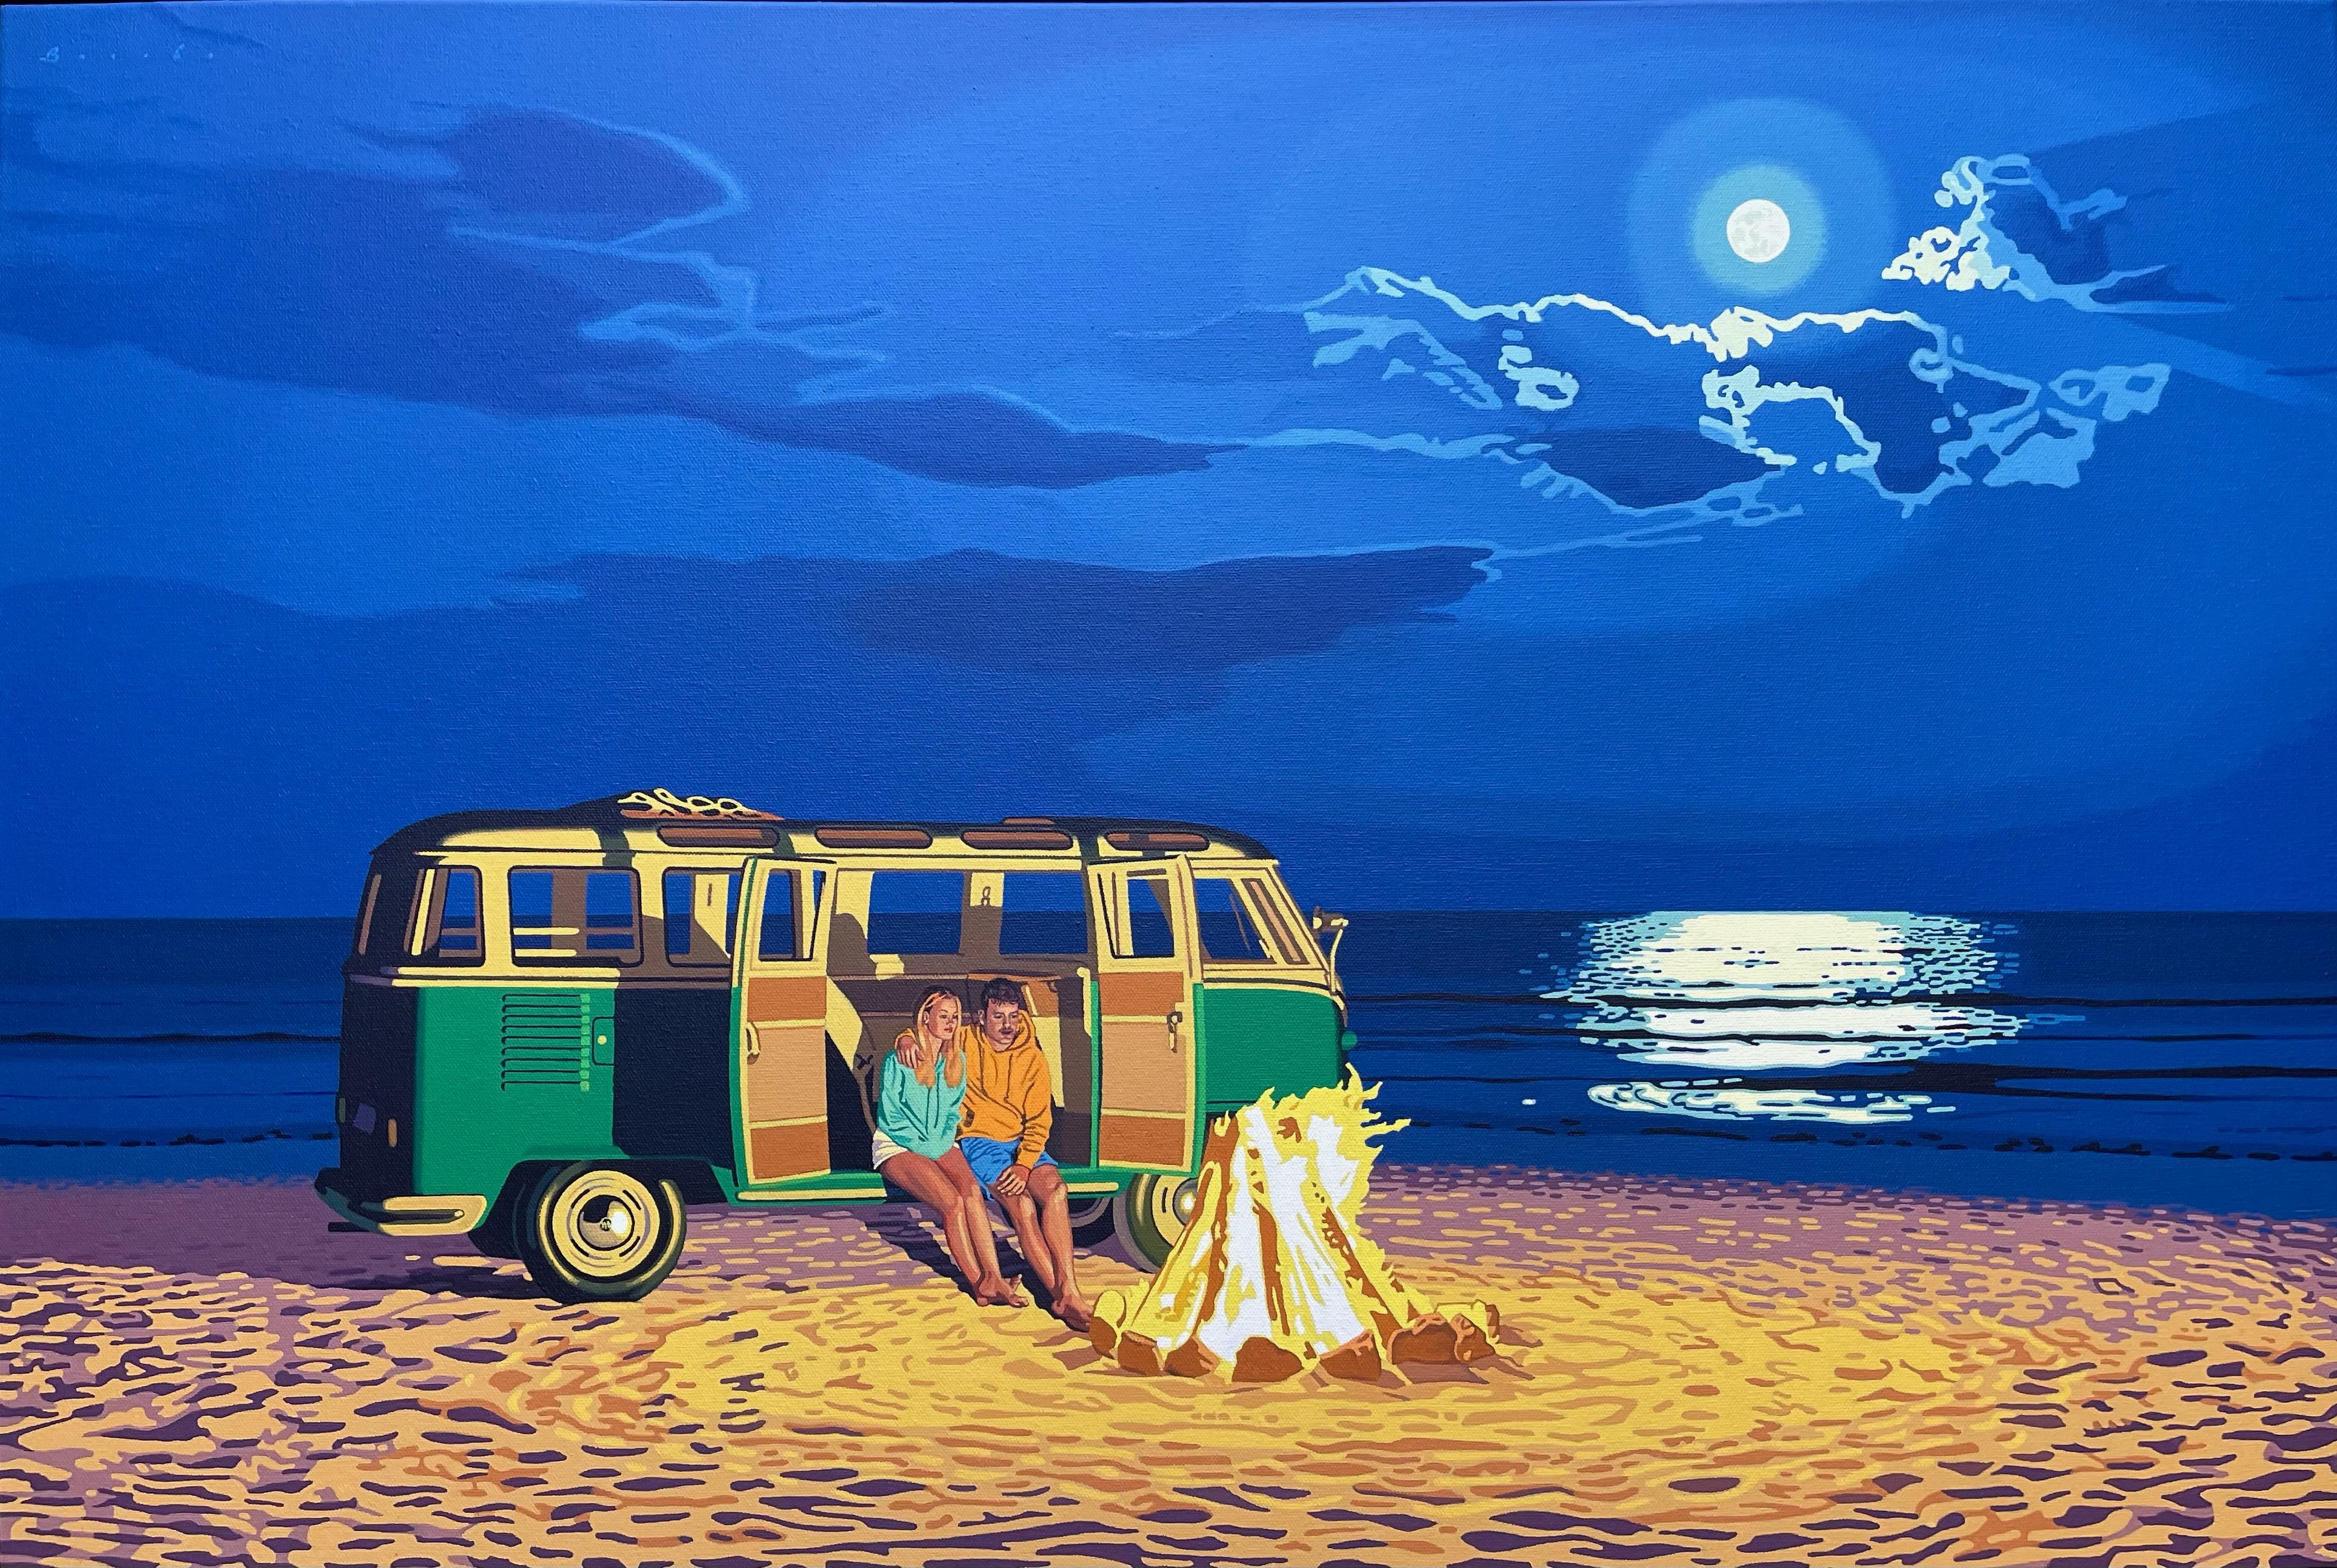 Rob Brooks Landscape Painting - "Summer Night" oil painting of a couple in a VW bus on the beach in moonlight